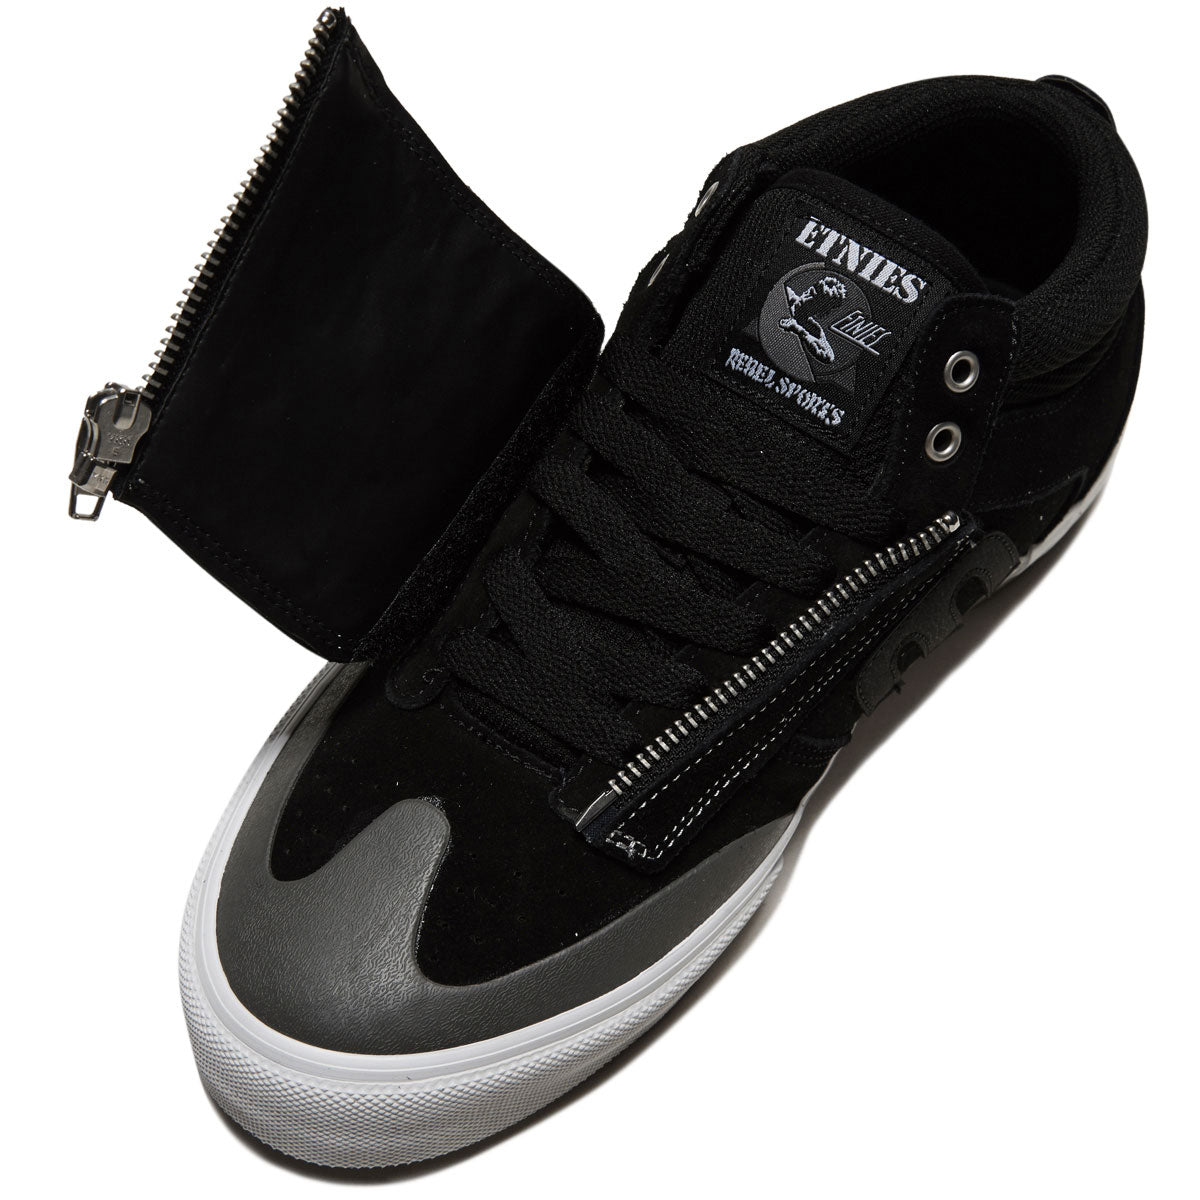 Etnies Windrow Vulc Mid Shoes - Black/White/Silver image 5